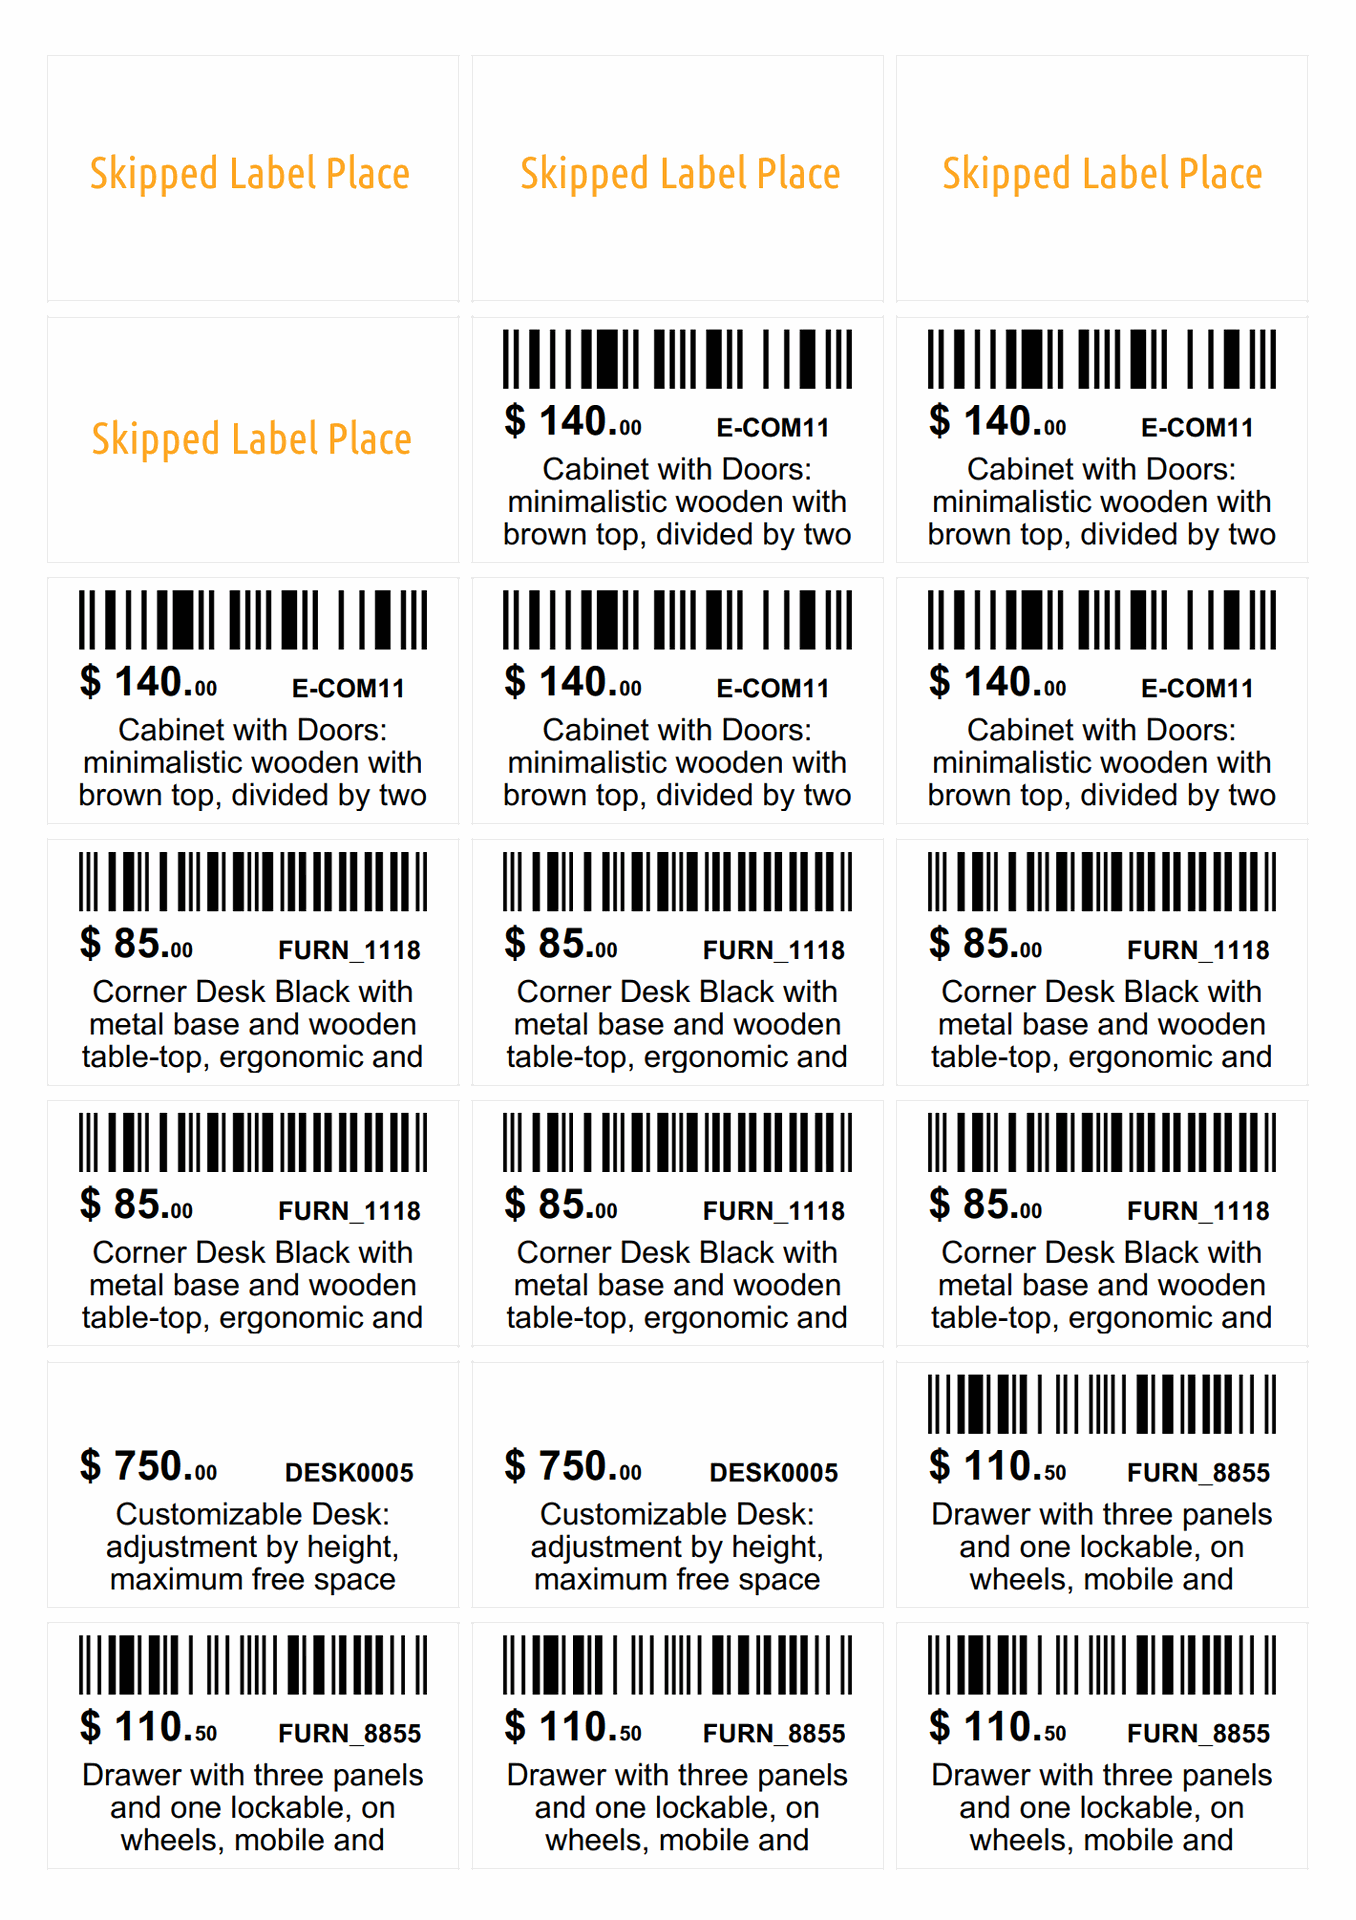 Odoo 15.0 a4 barcode product label 63 x 38 mm